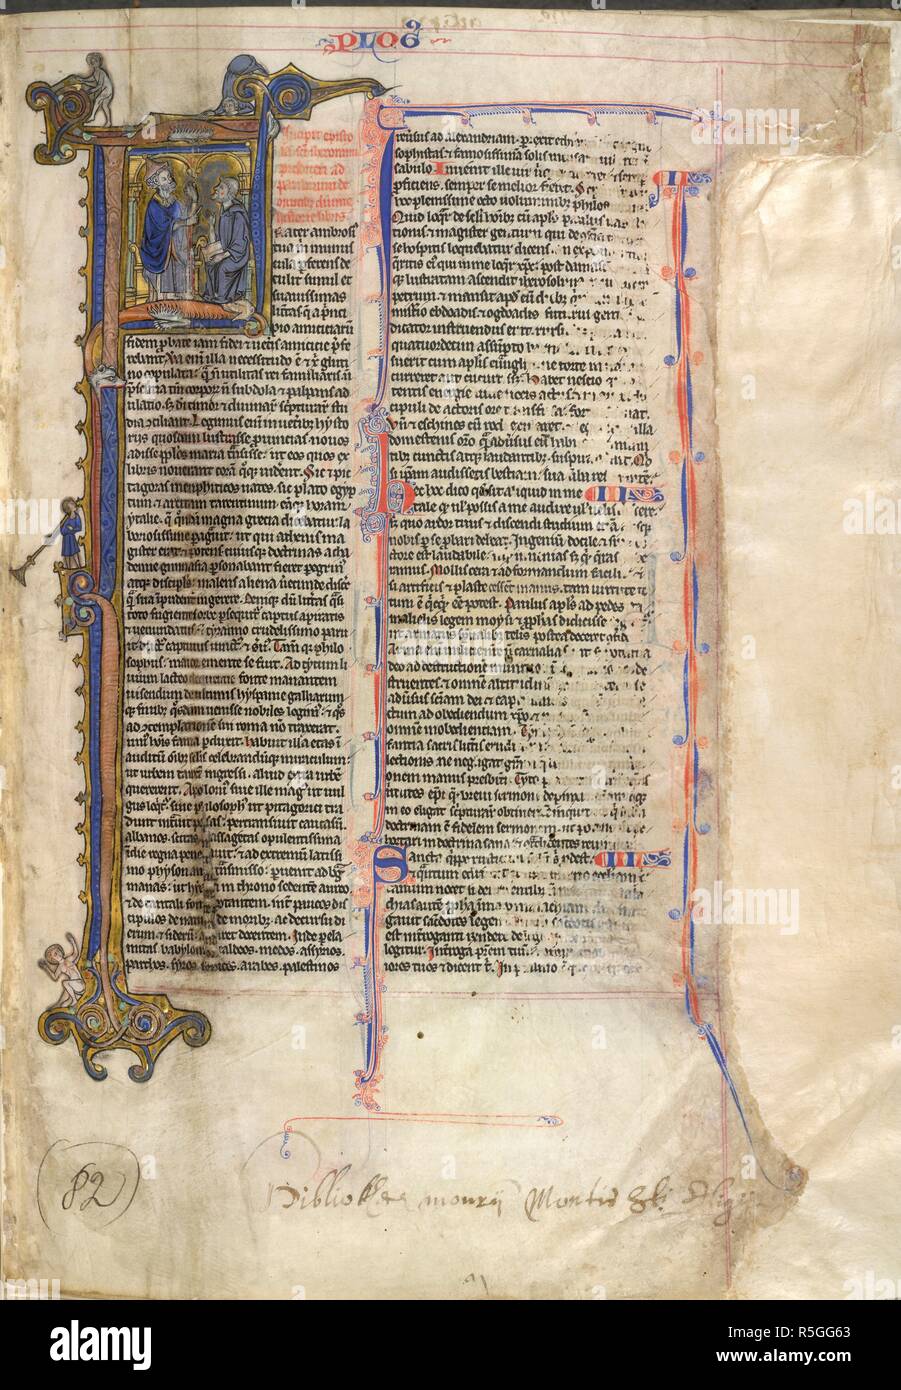 Historiated initial 'F'(rater) with Jerome and Pope Damasus, at the beginning of the Bible; ownership inscription: '82 Bibliotheca monasterii montis Sancti Eligii' in the lower margin. Bible ('The Brantwood Bible'). France, N. (Arras); c. 1260. Source: Yates Thompson 22, f.1. Language: Latin. Stock Photo